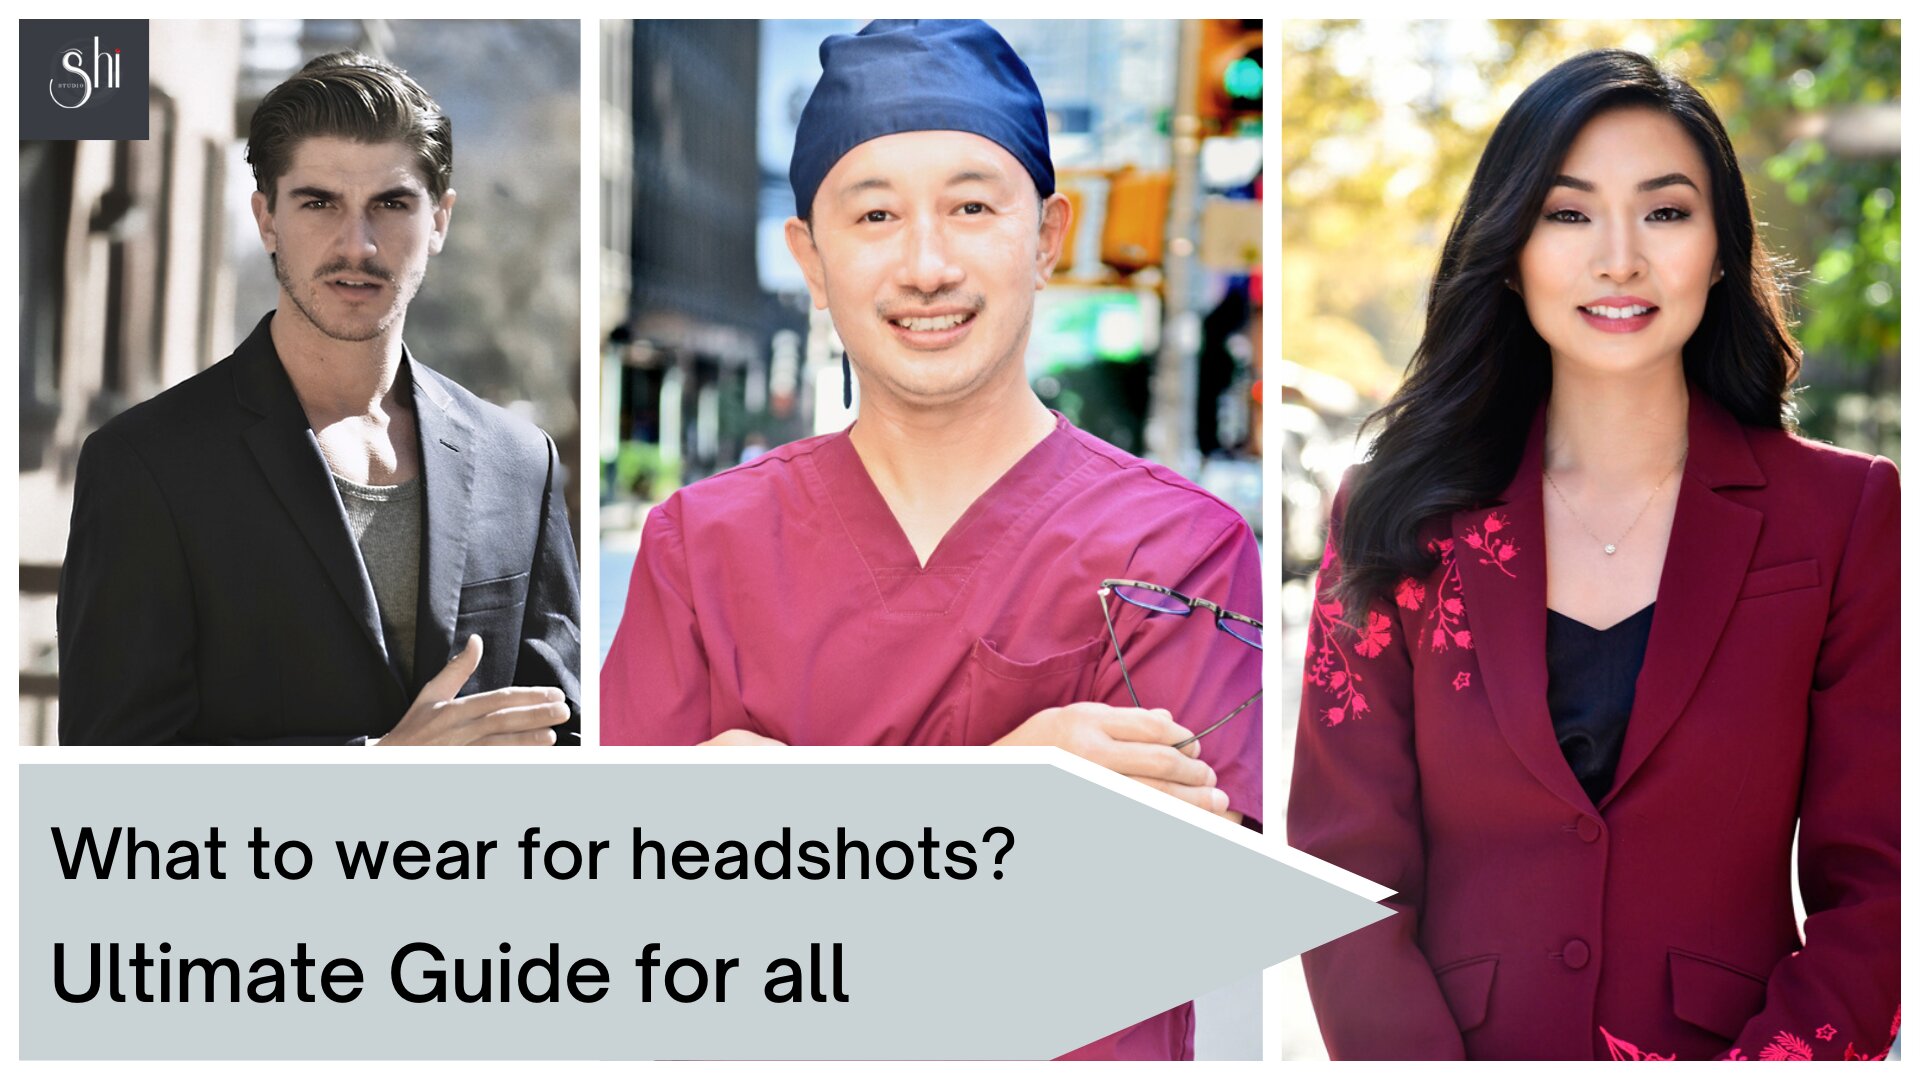 How to go prepared for the Headshot | The Ultimate Checklist for all